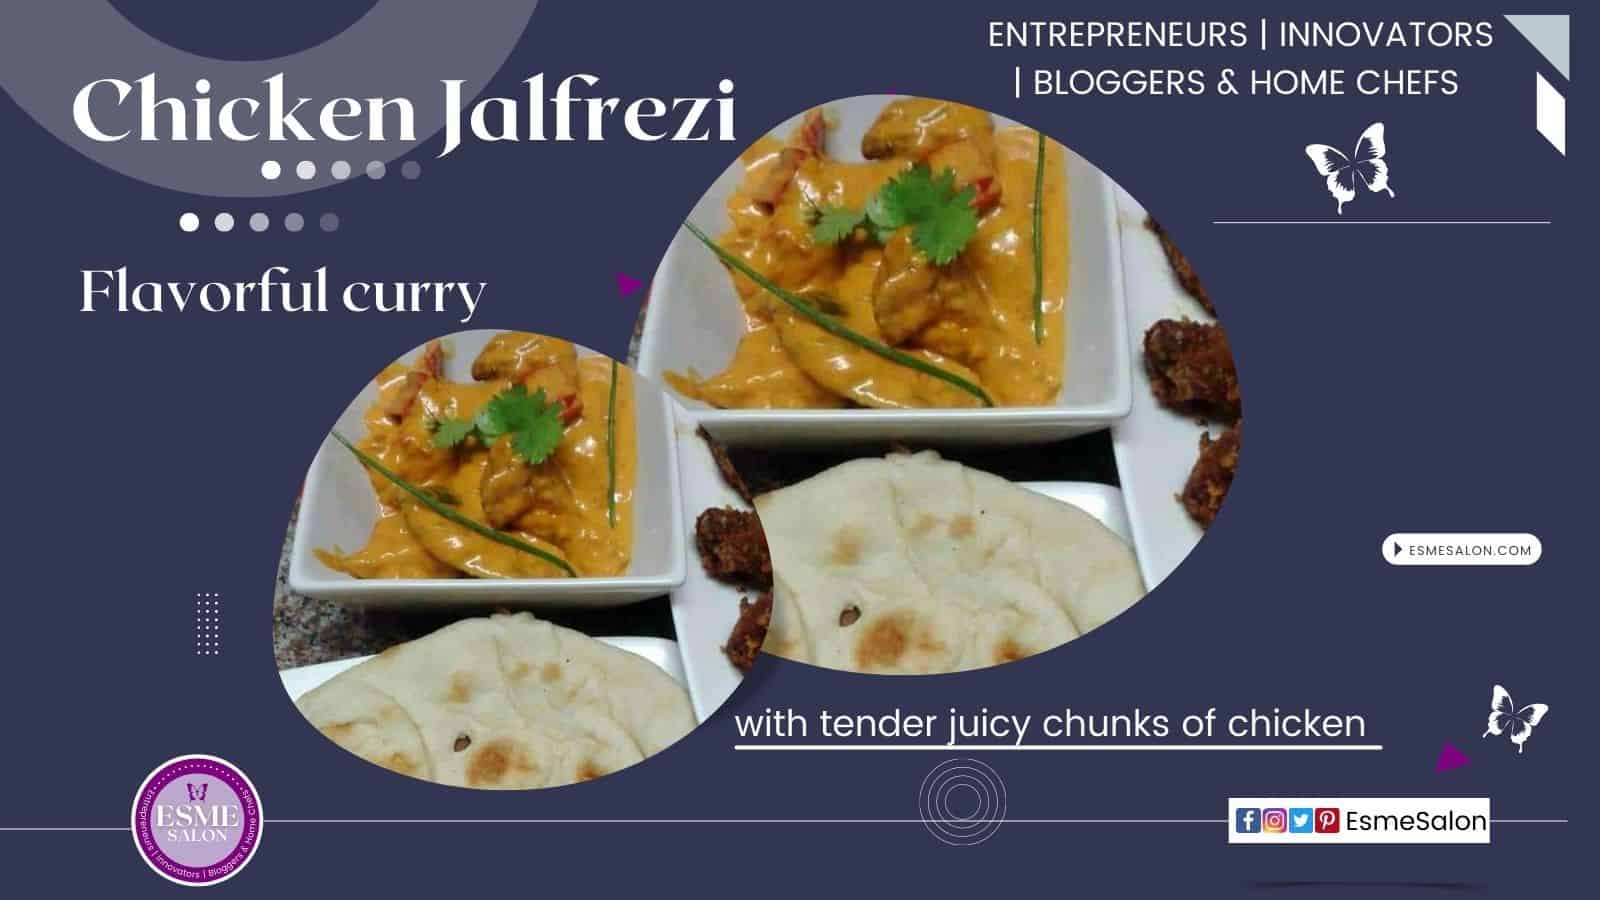 flavorful curry with tender juicy chunks of chicken in a spicy tomato sauce studded with stir-fried peppers and onions